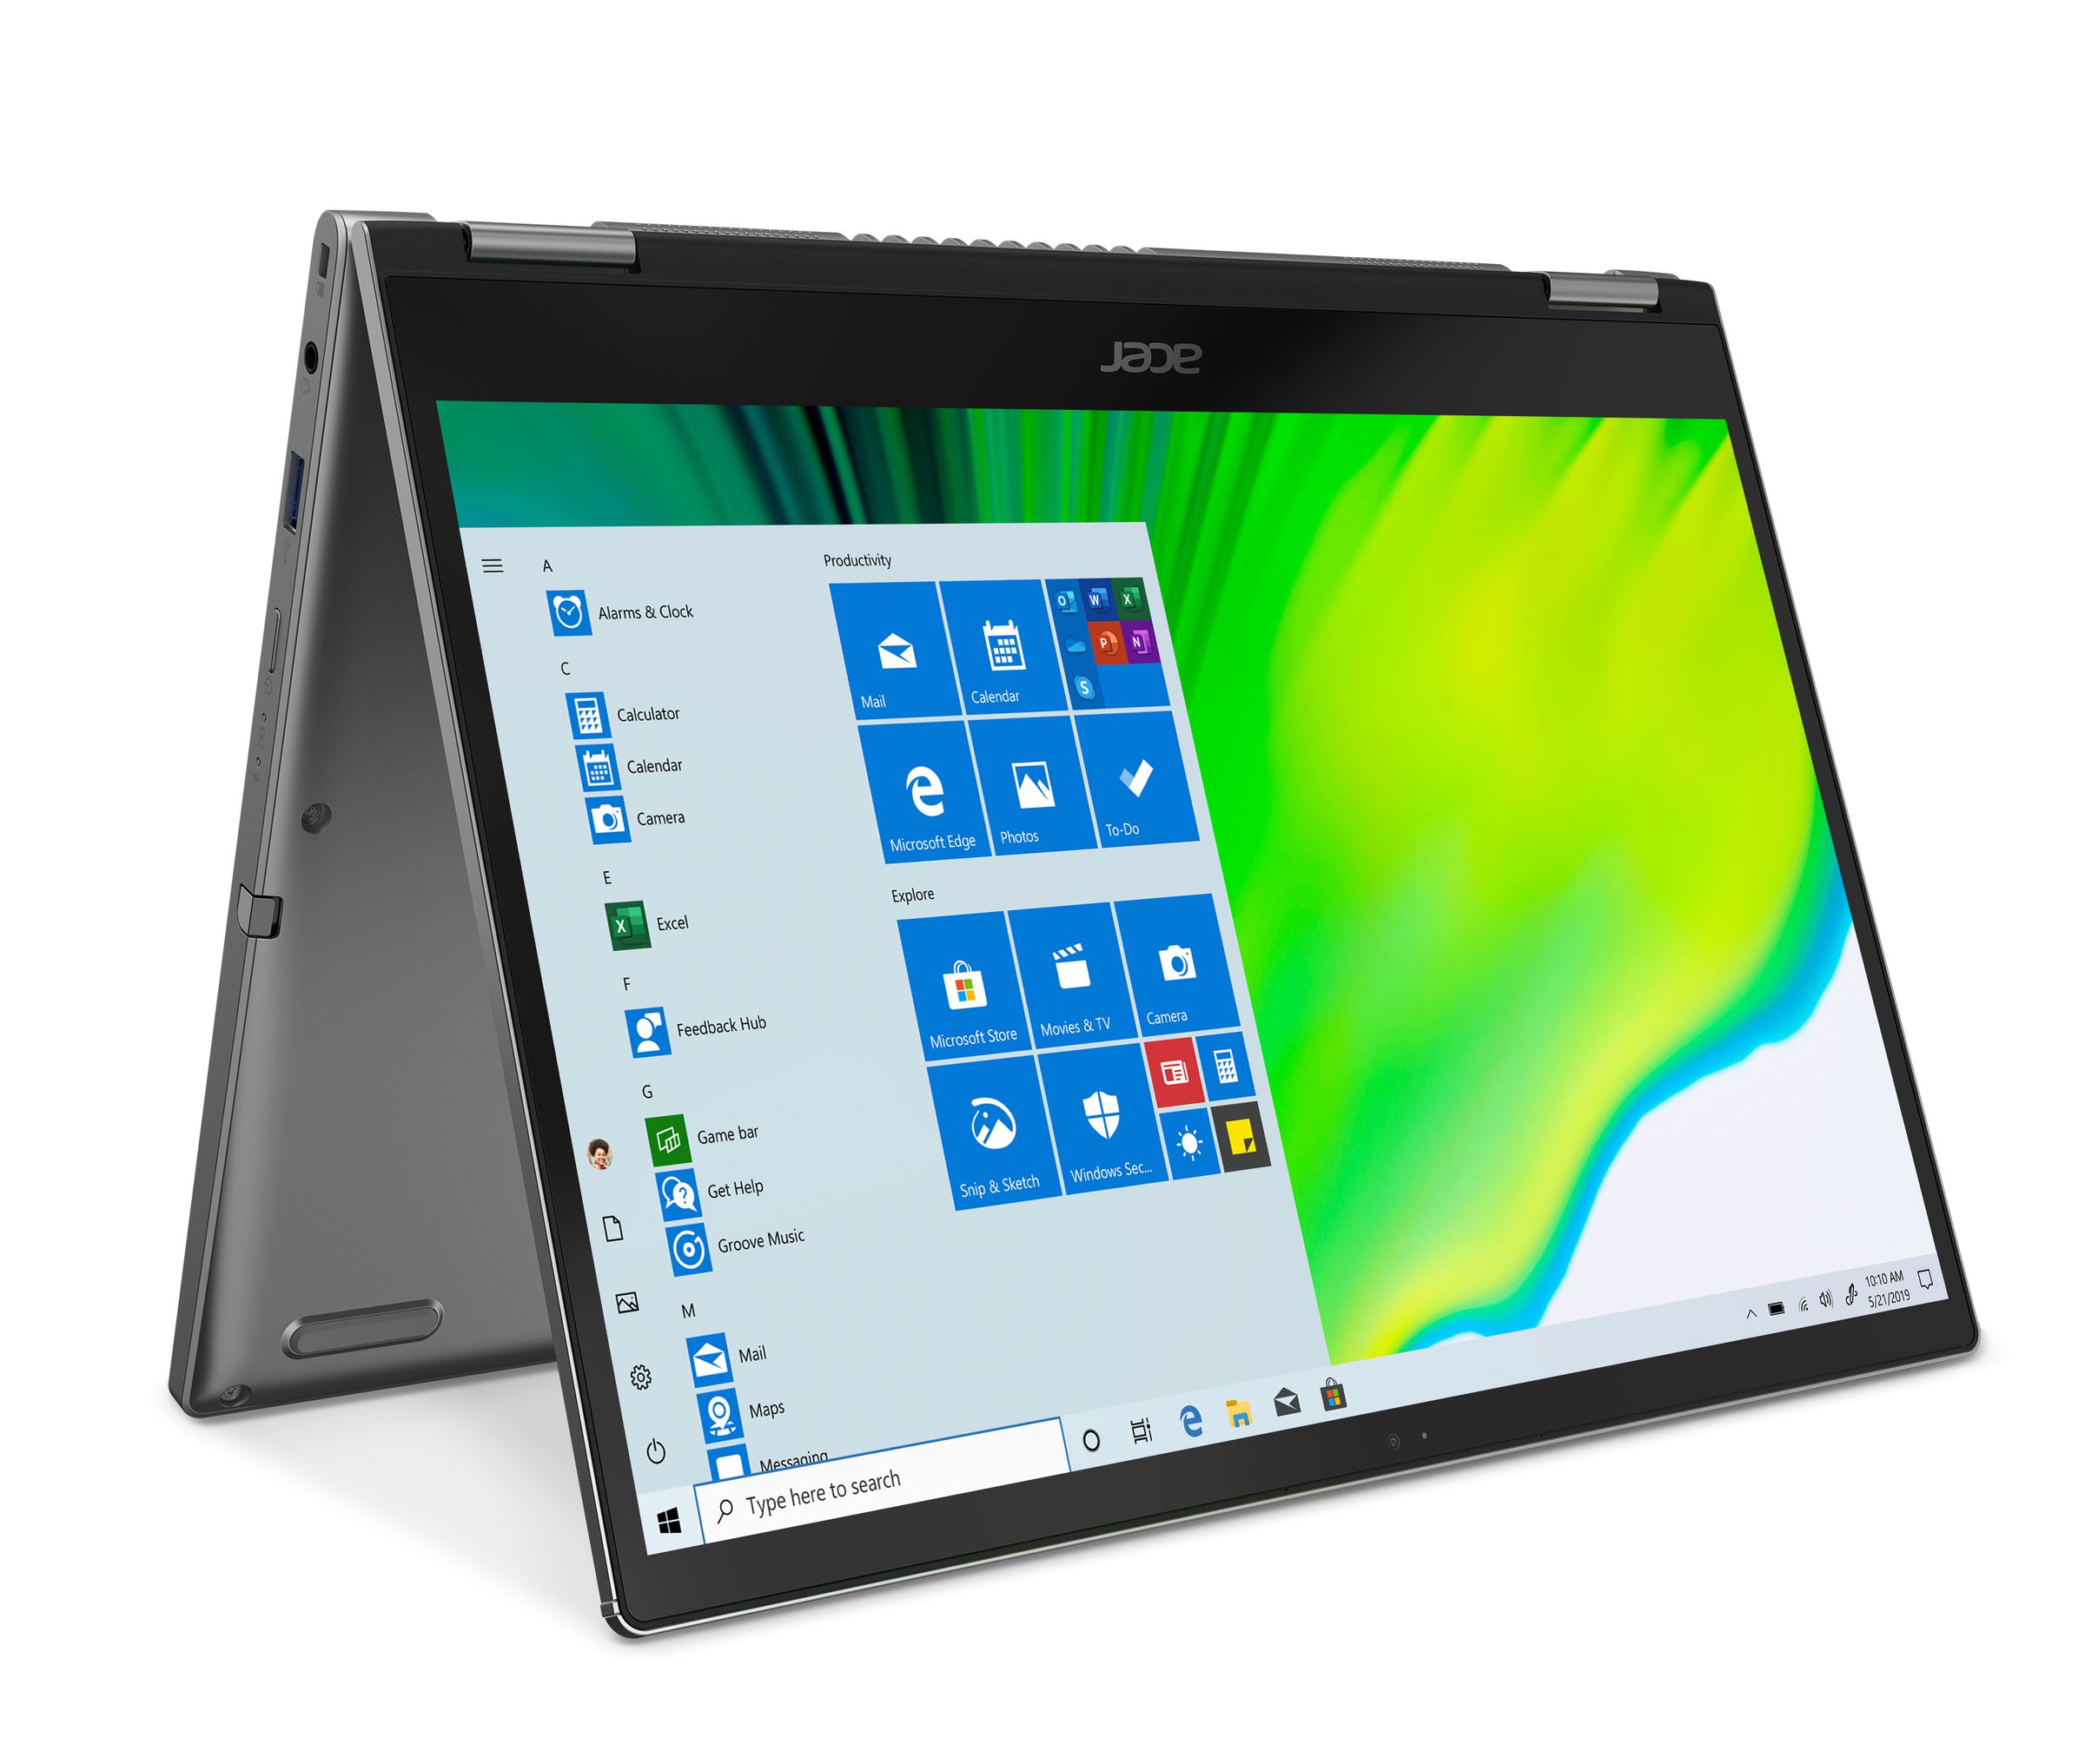 Acer Spin 3, featuring a new 16:10 display.